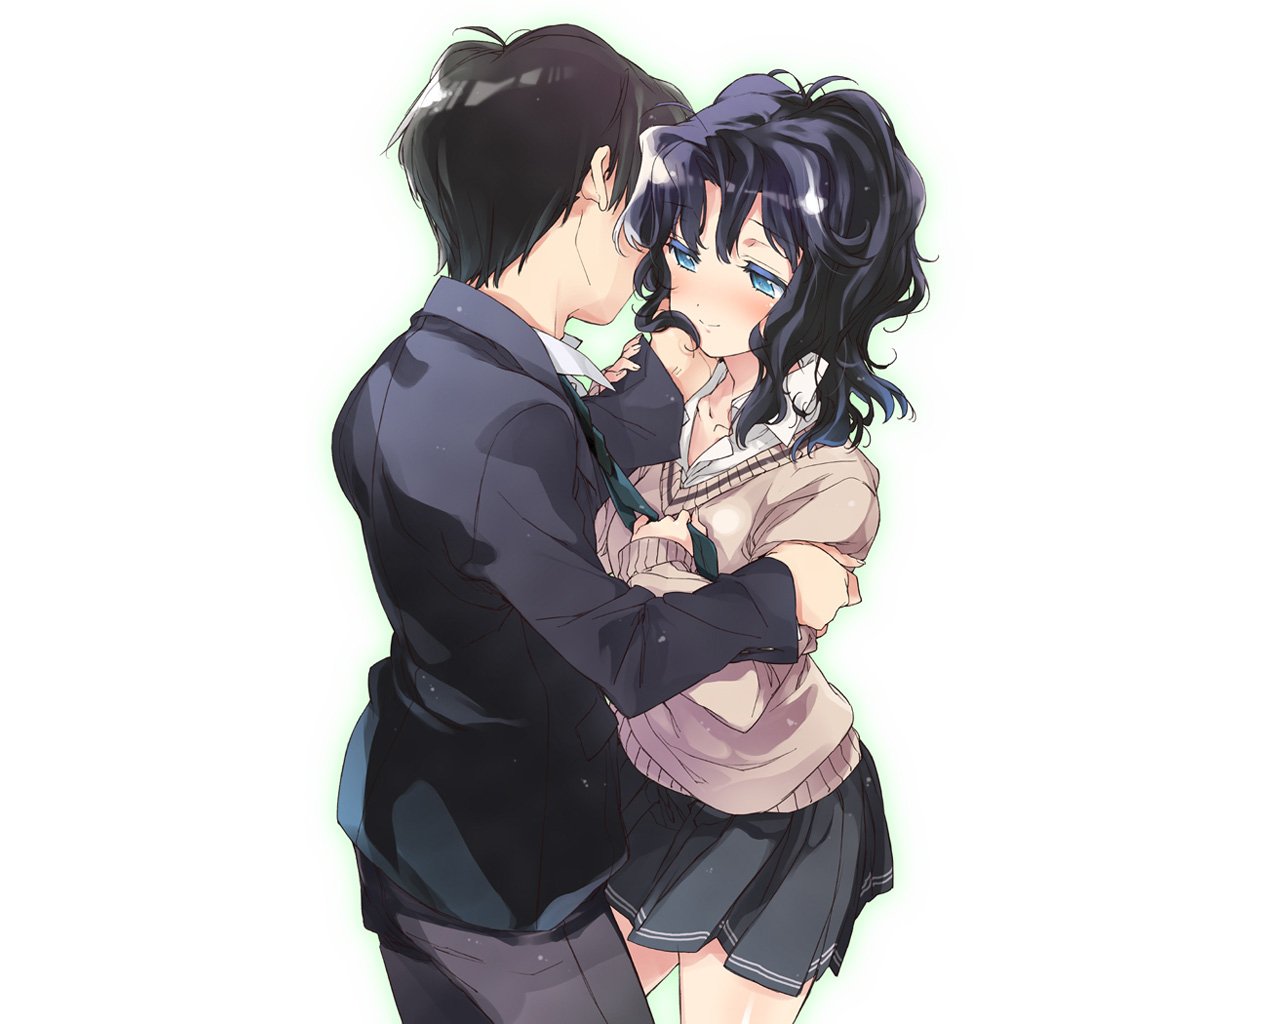 Amagami Image - ID: 486991 - Image Abyss